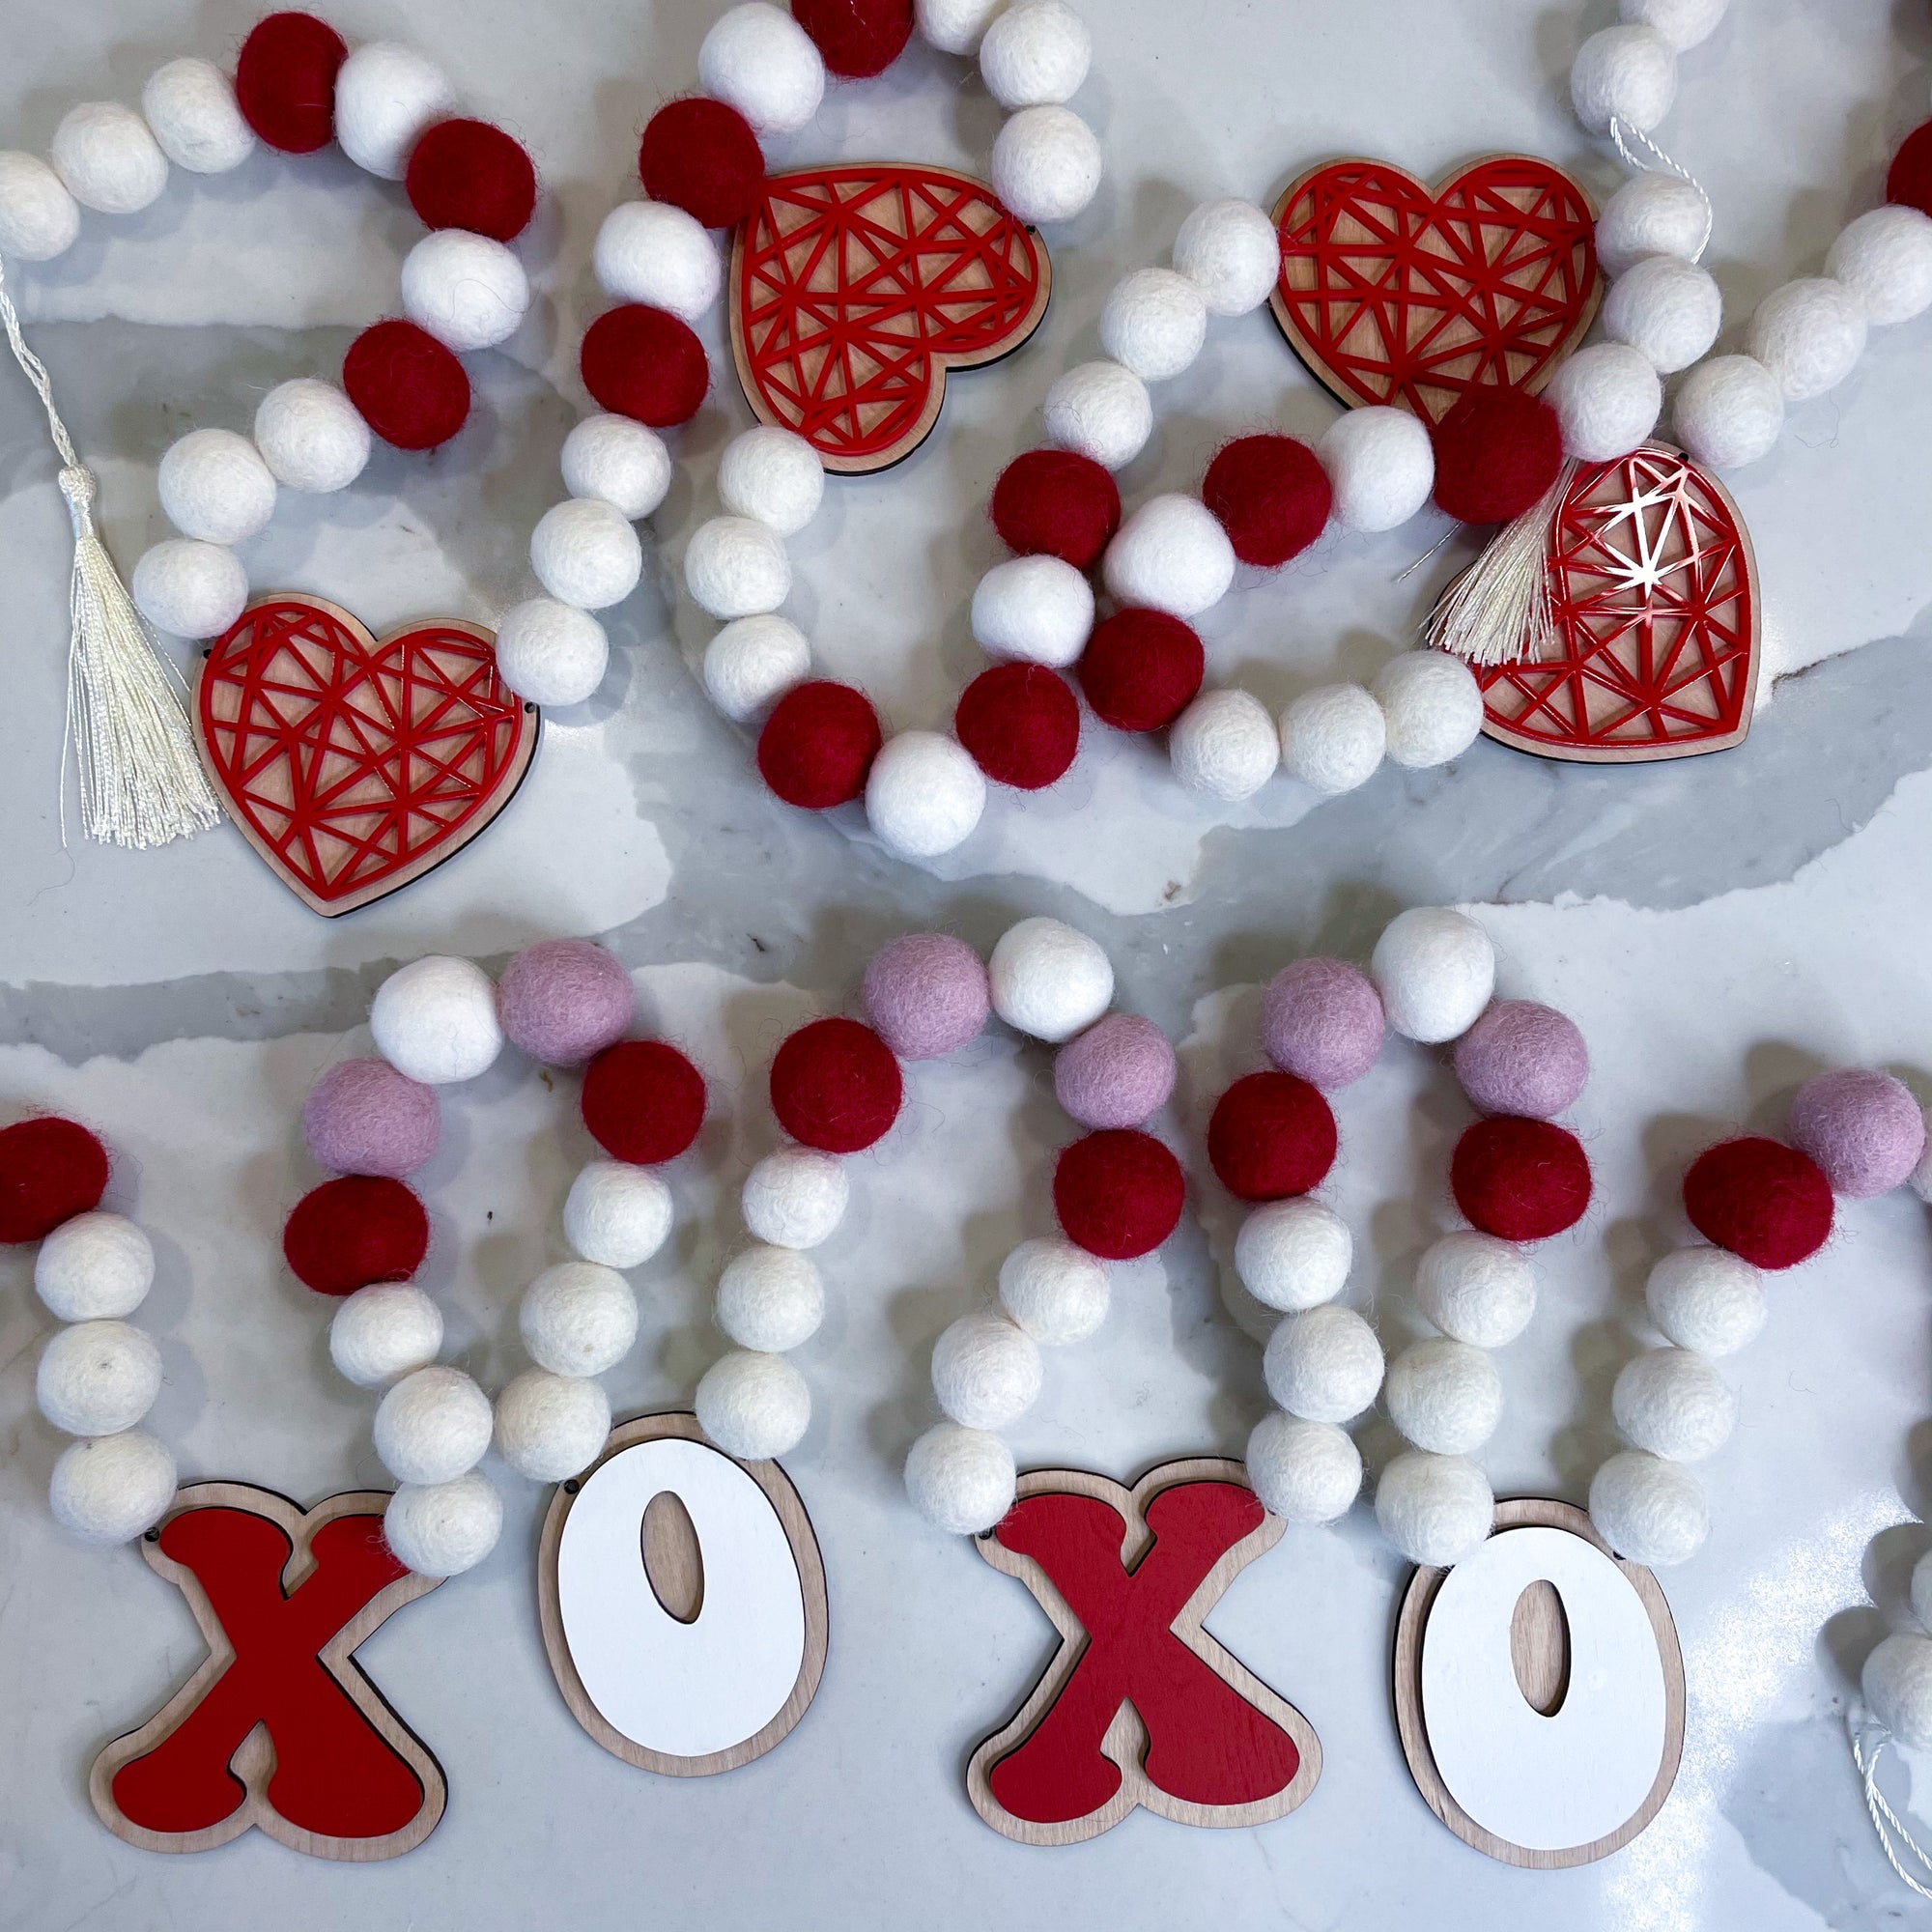 XOXO, Red and Pink - Valentine’s Day Garland